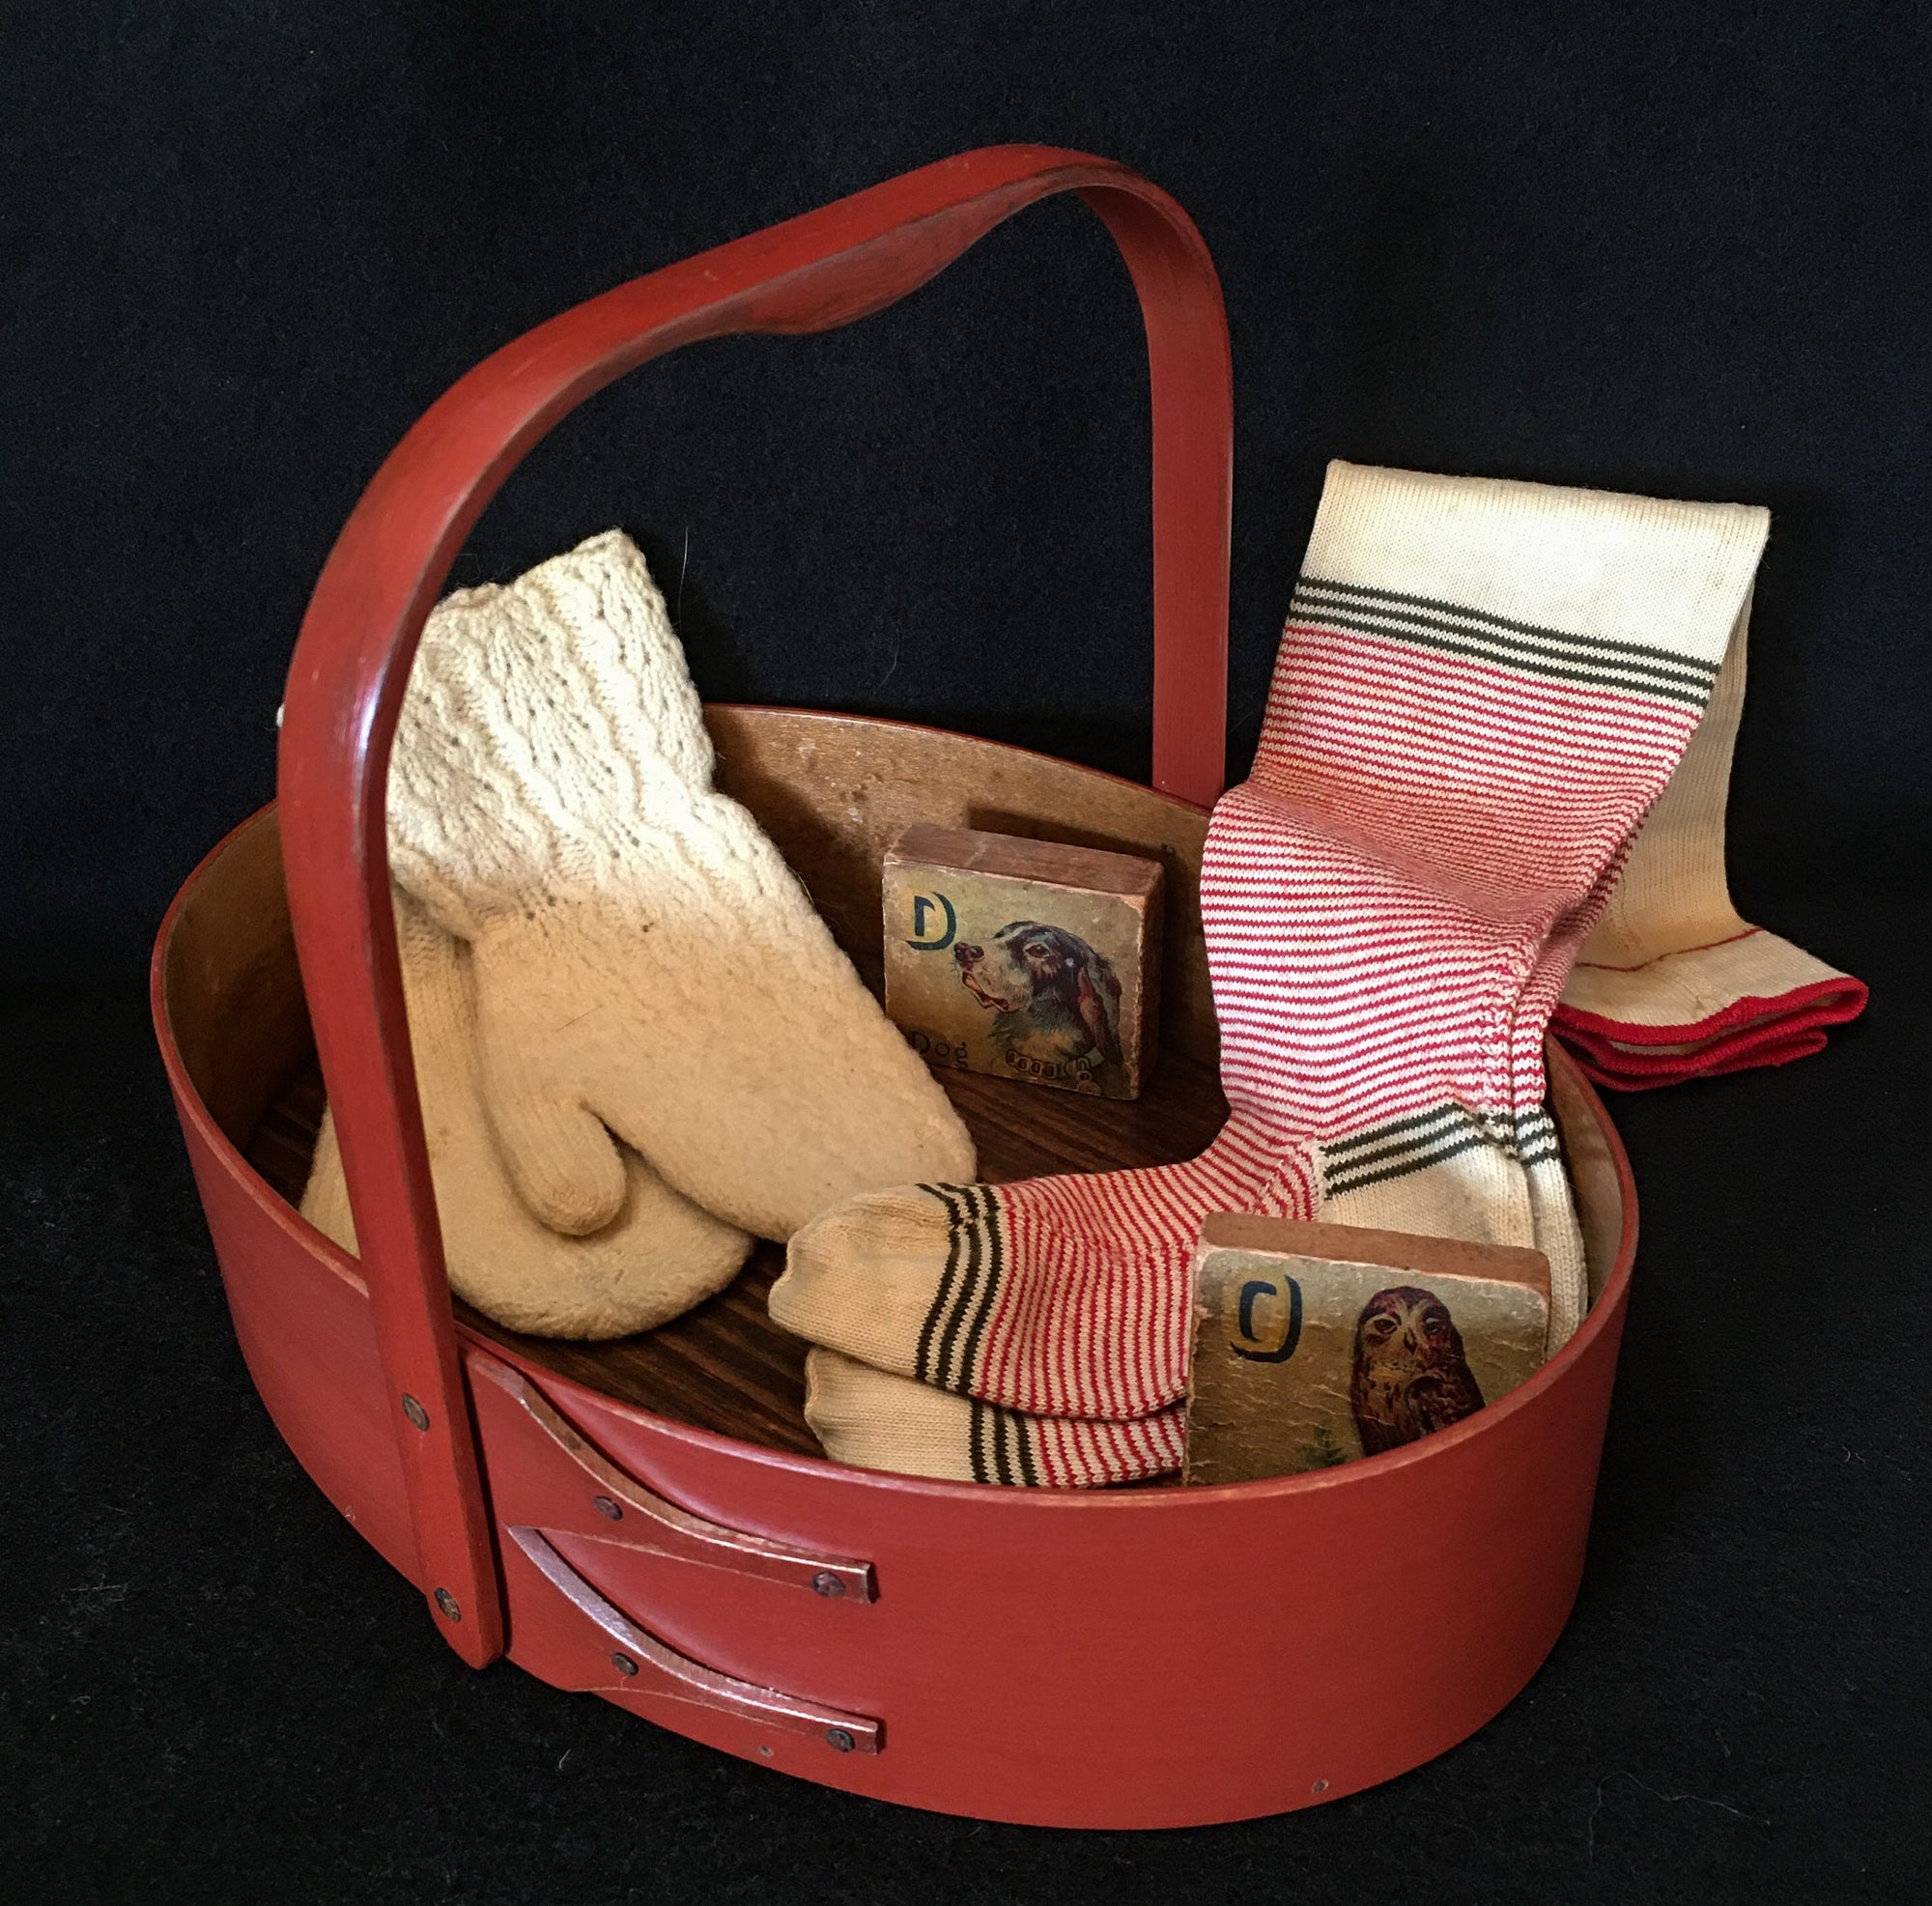 Small Shaker Style Sewing Carrier, LeHays Shaker Boxes, Handcrafted in Maine, Red Milk Paint Finish, Shown Holding Items